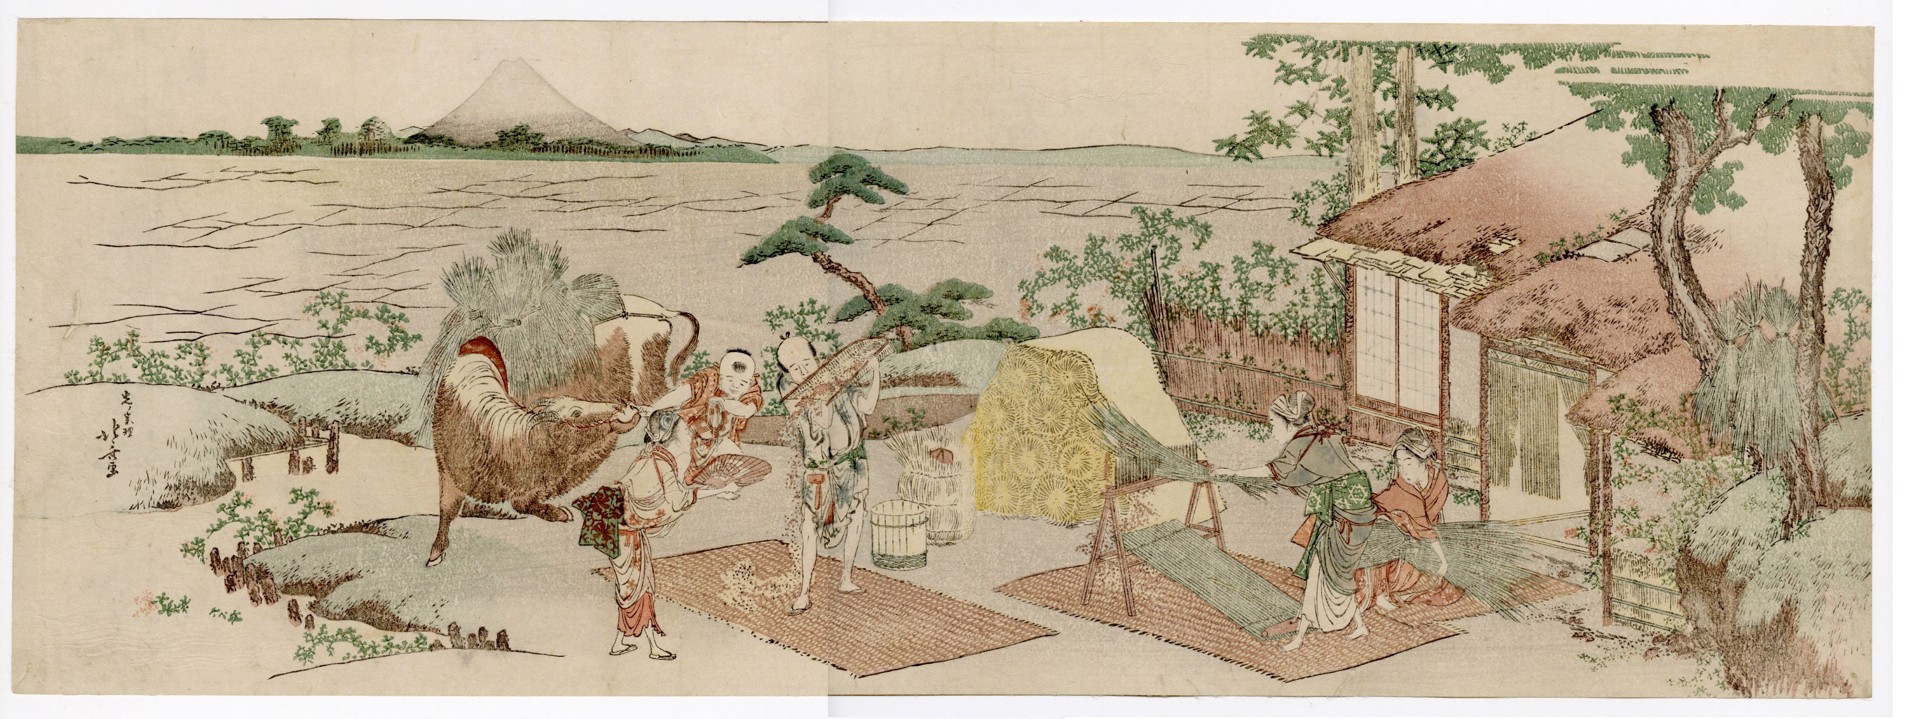 Winnowing Rice at an Ancient or Old Style Market on the Bank of a River by Hokusai